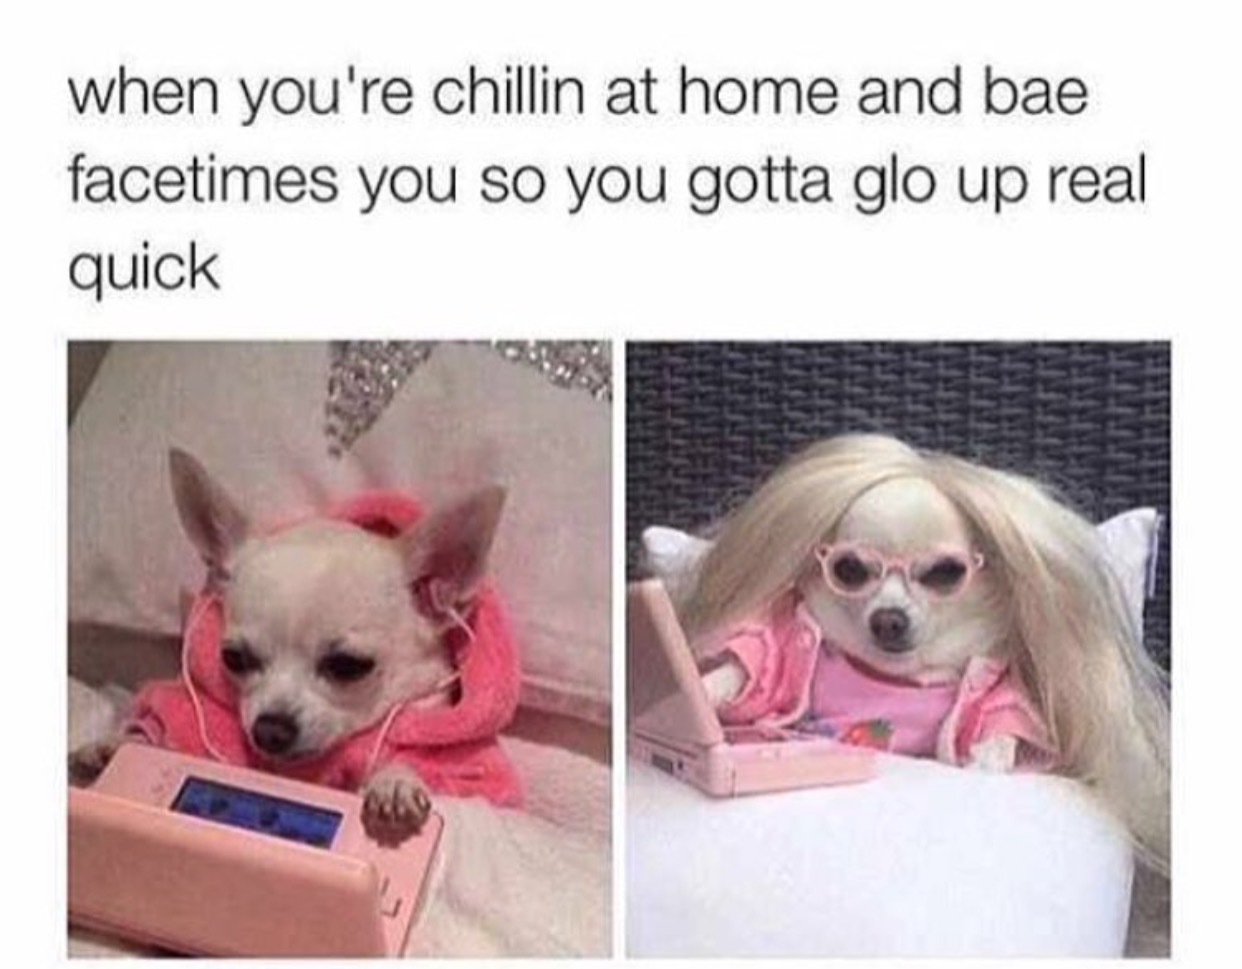 A chihuahua in her pink sweater and blonde hair and cute outfit while sitting on the bed in front of her photo photos with caption - when you're chilling at home and bae facetimes you so you gotta glo up real quick